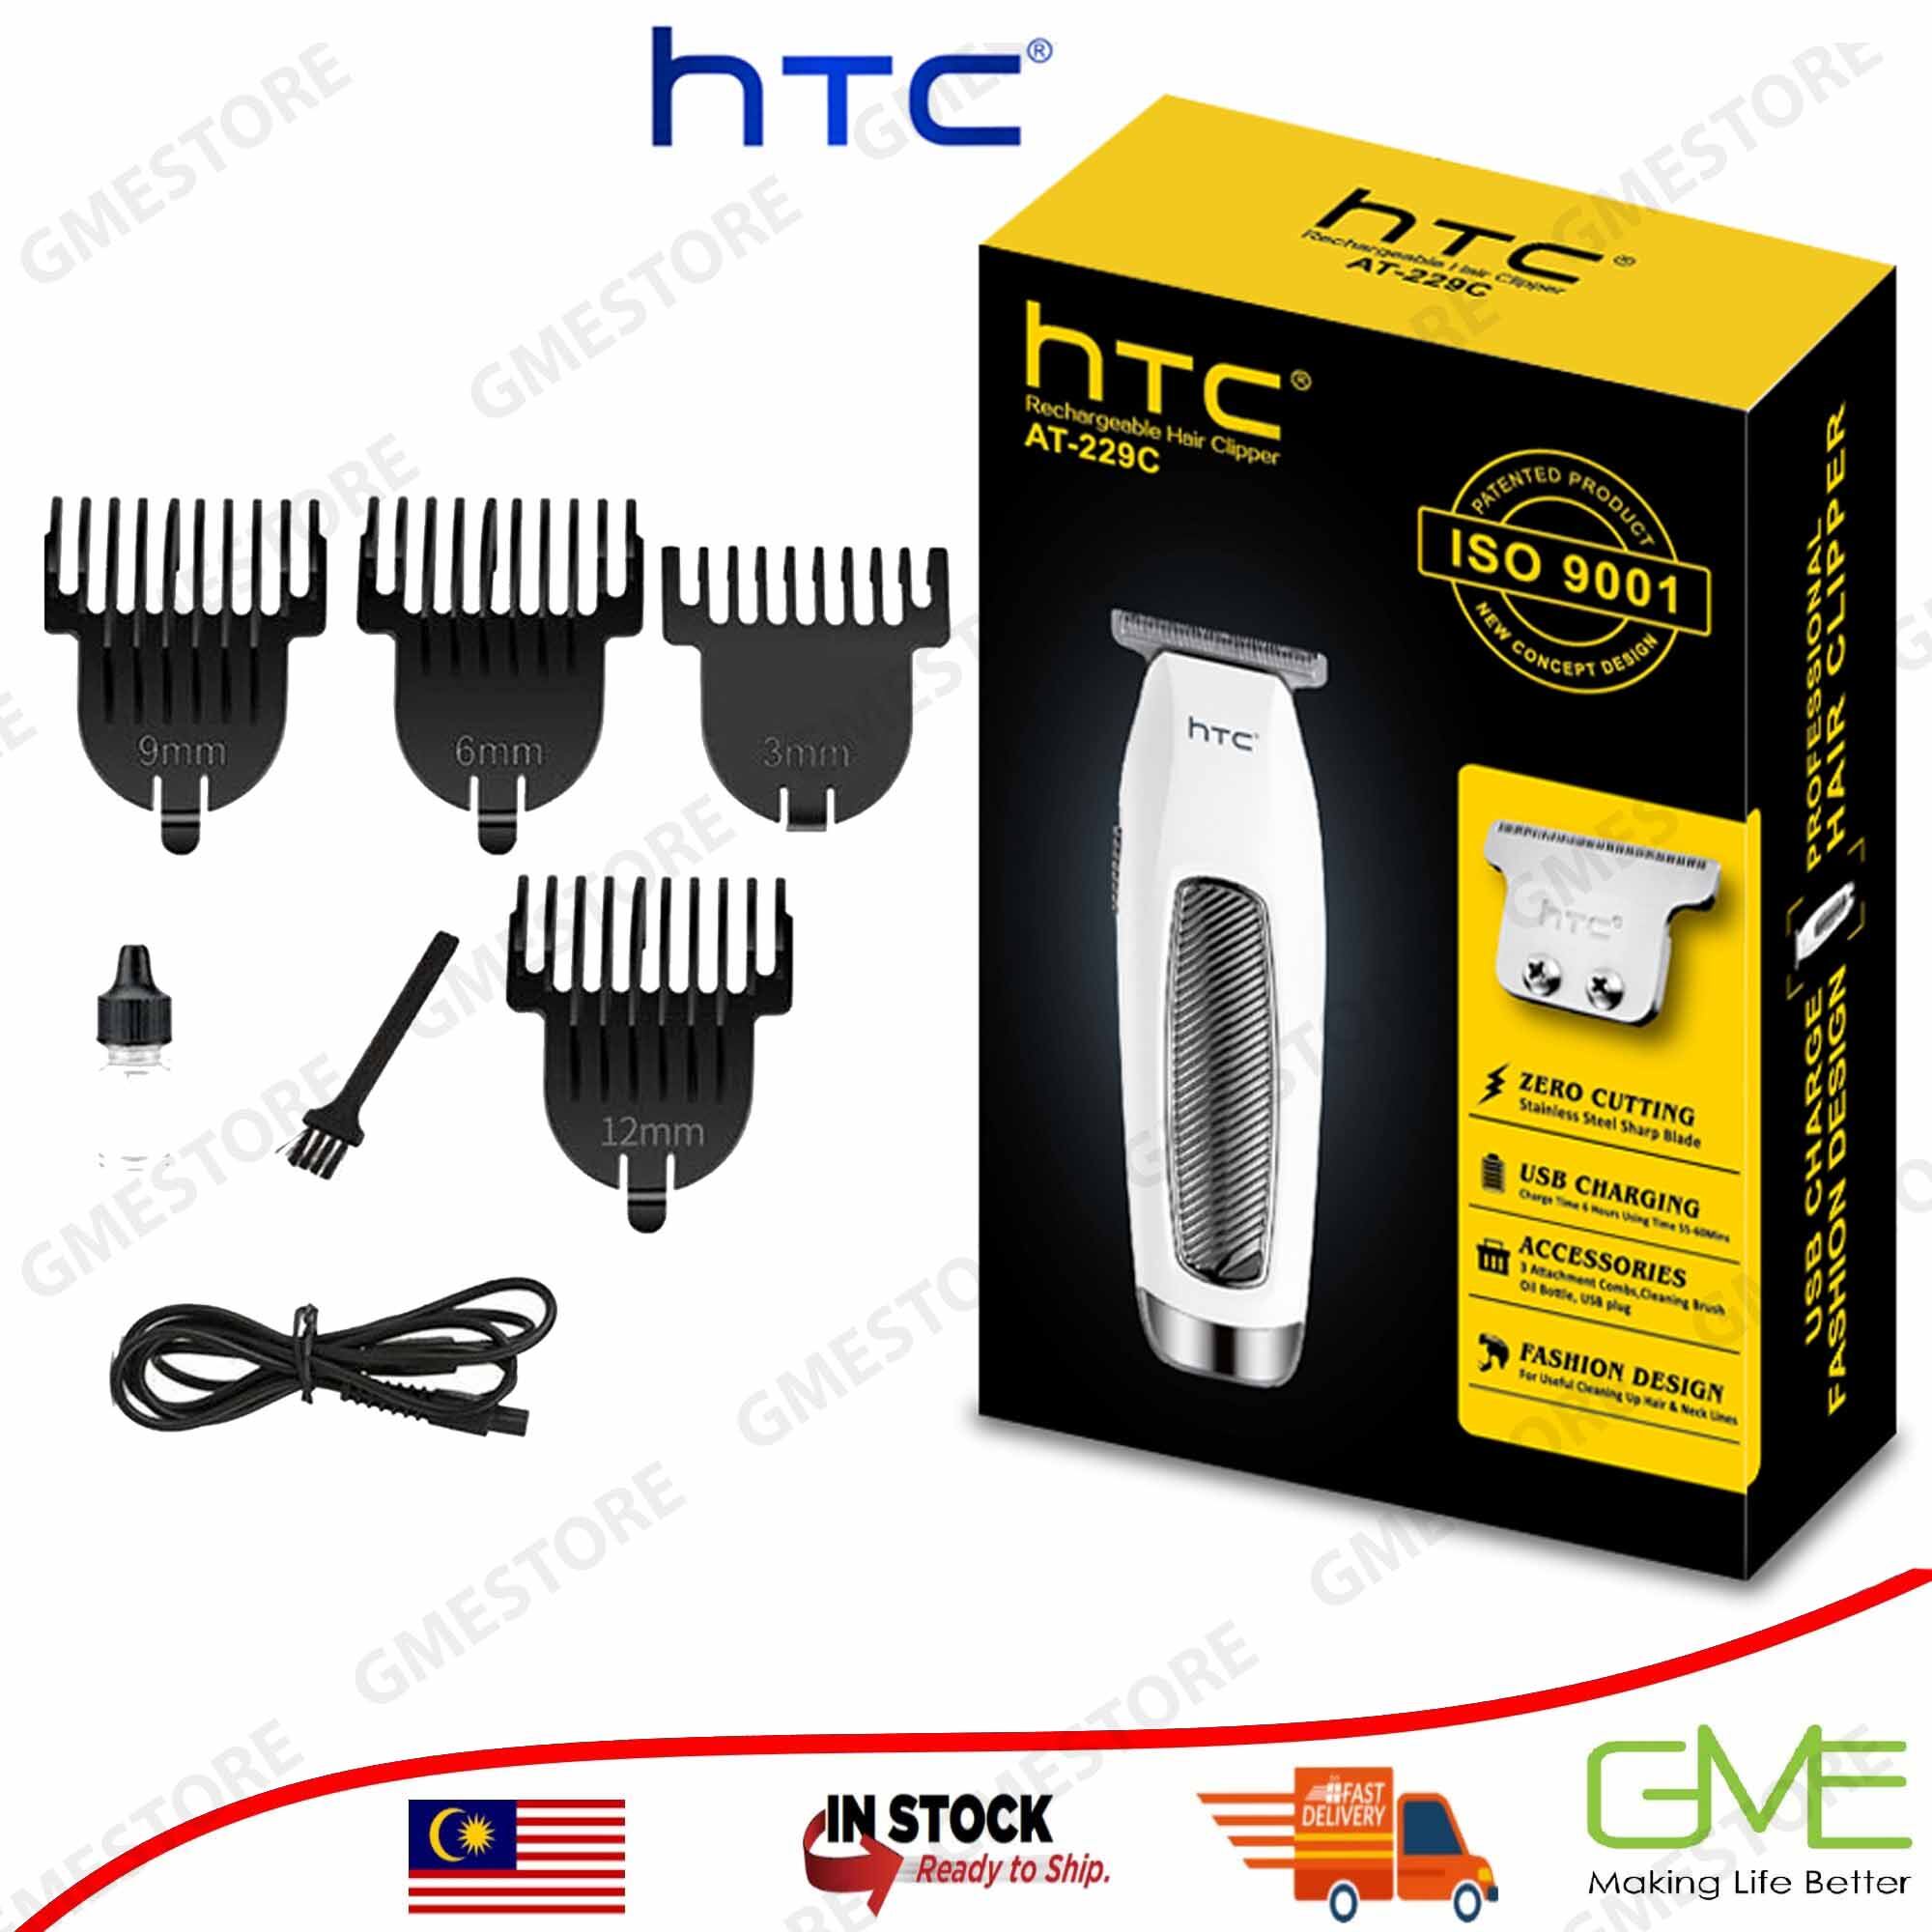 htc at